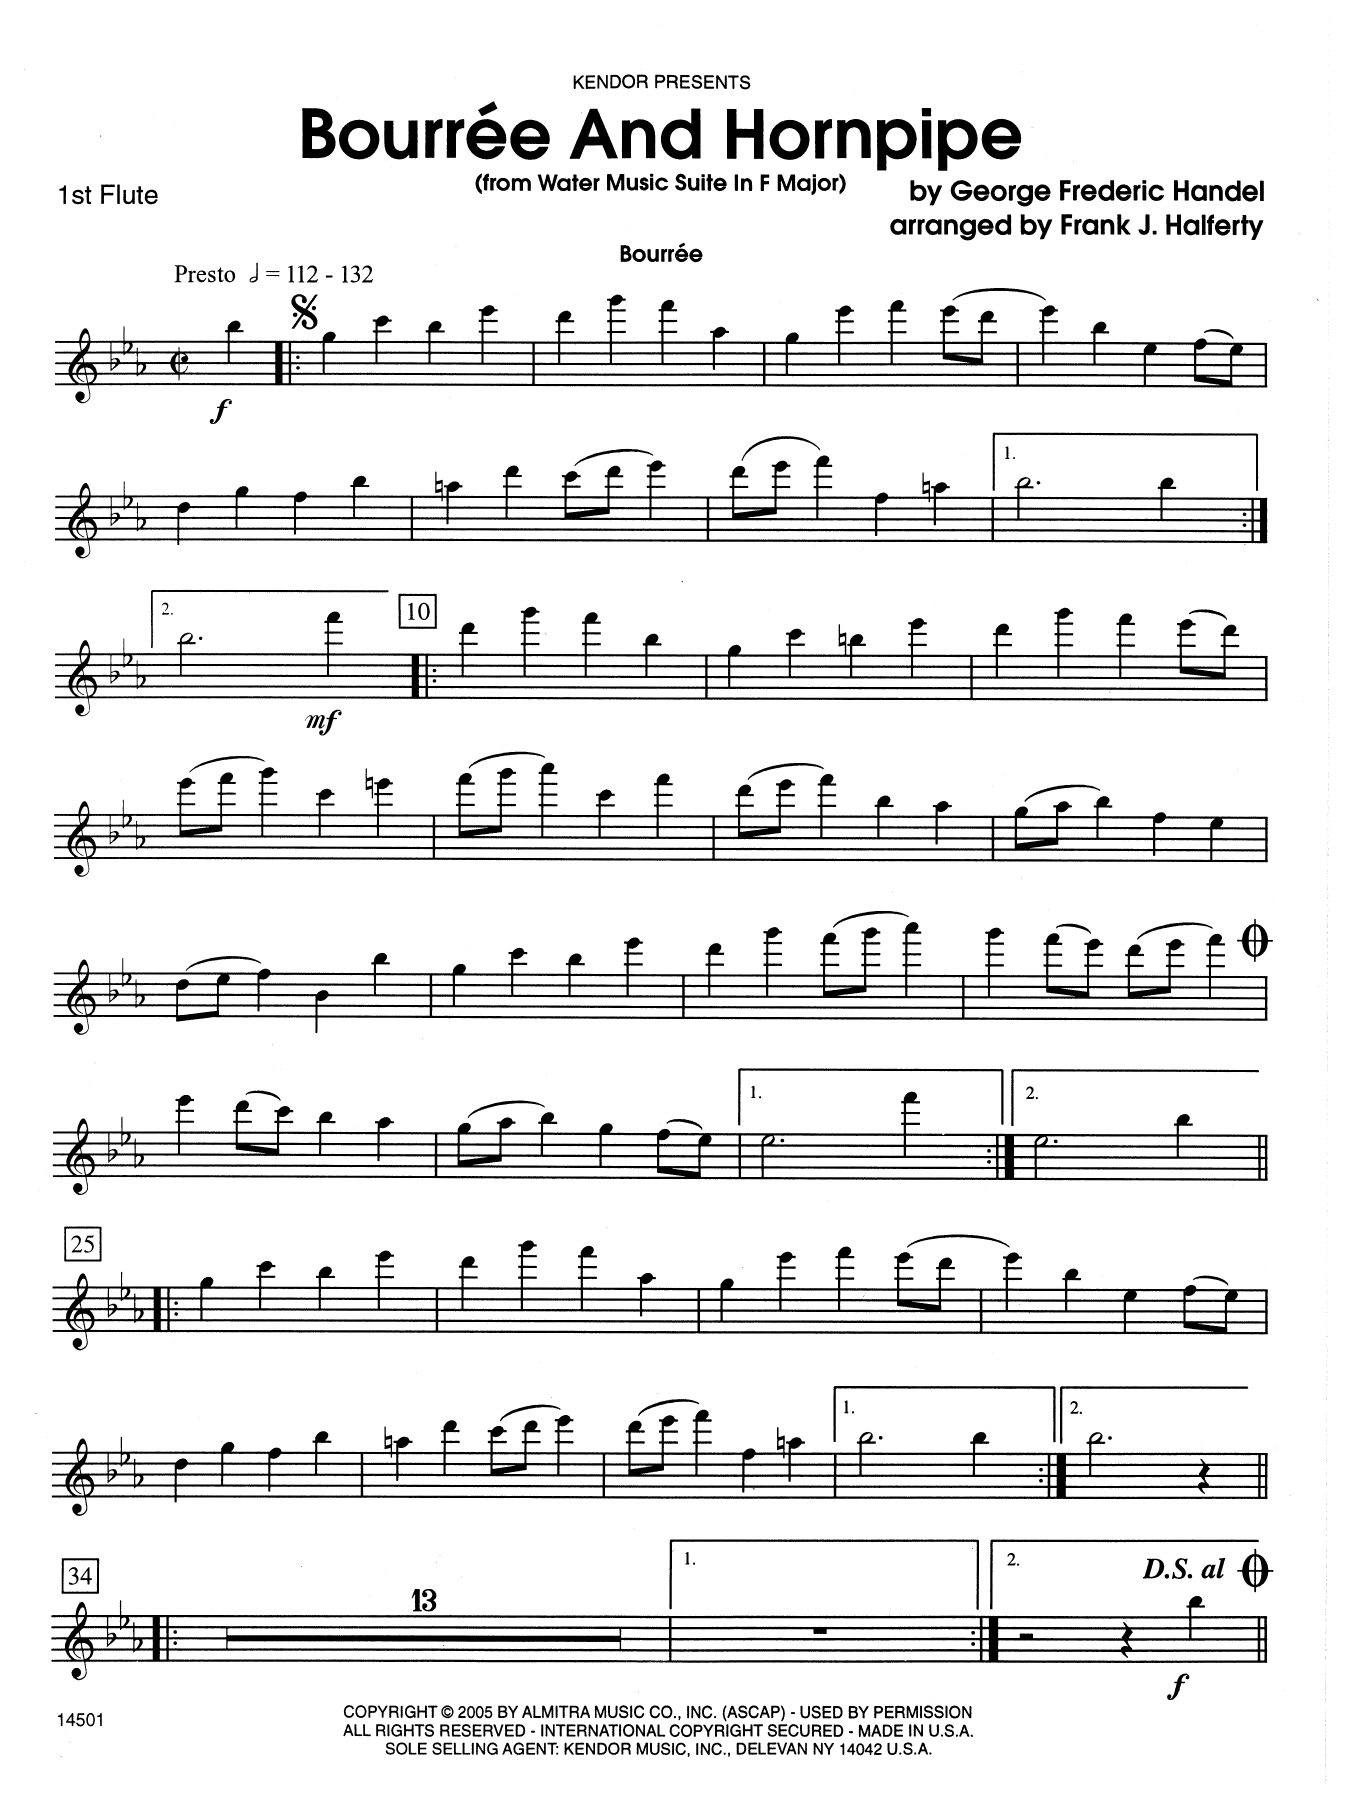 Bourree And Hornpipe (from Water Music Suite In F Major) - 1st Flute (Woodwind Ensemble) von Frank J. Halferty